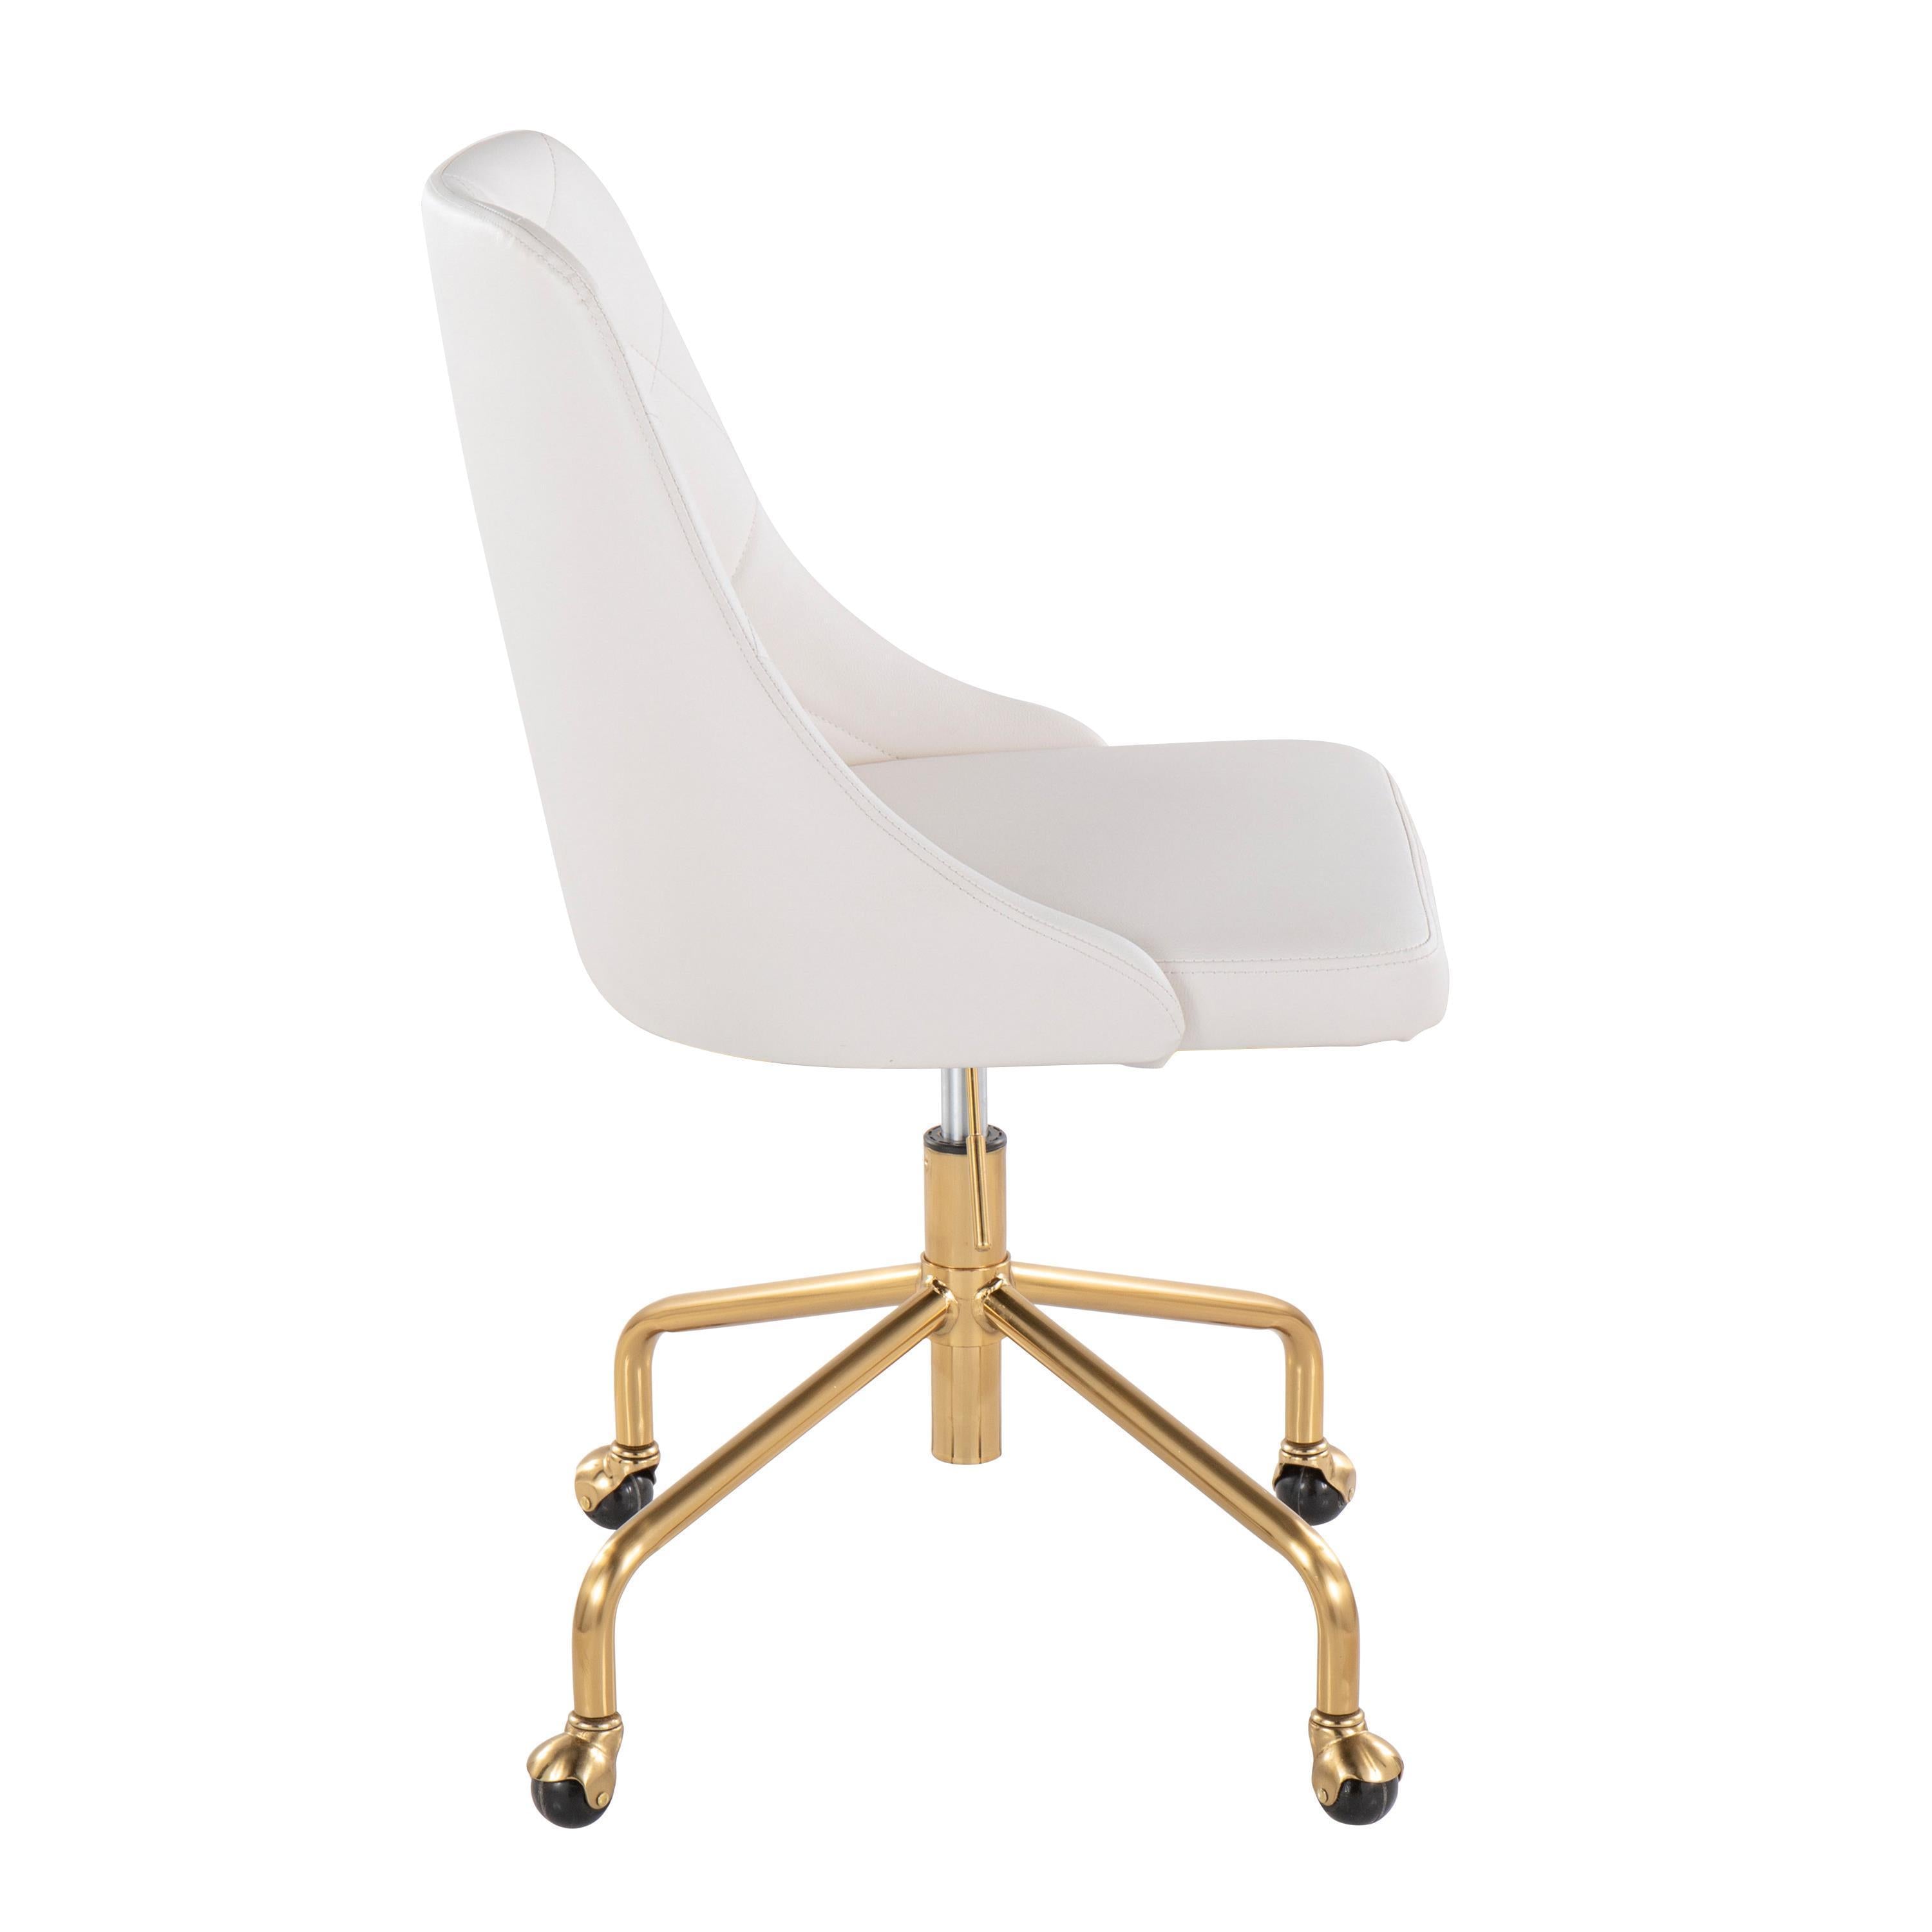 Contemporary Adjustable Office Chair with Casters in Gold Metal and White Faux Leather